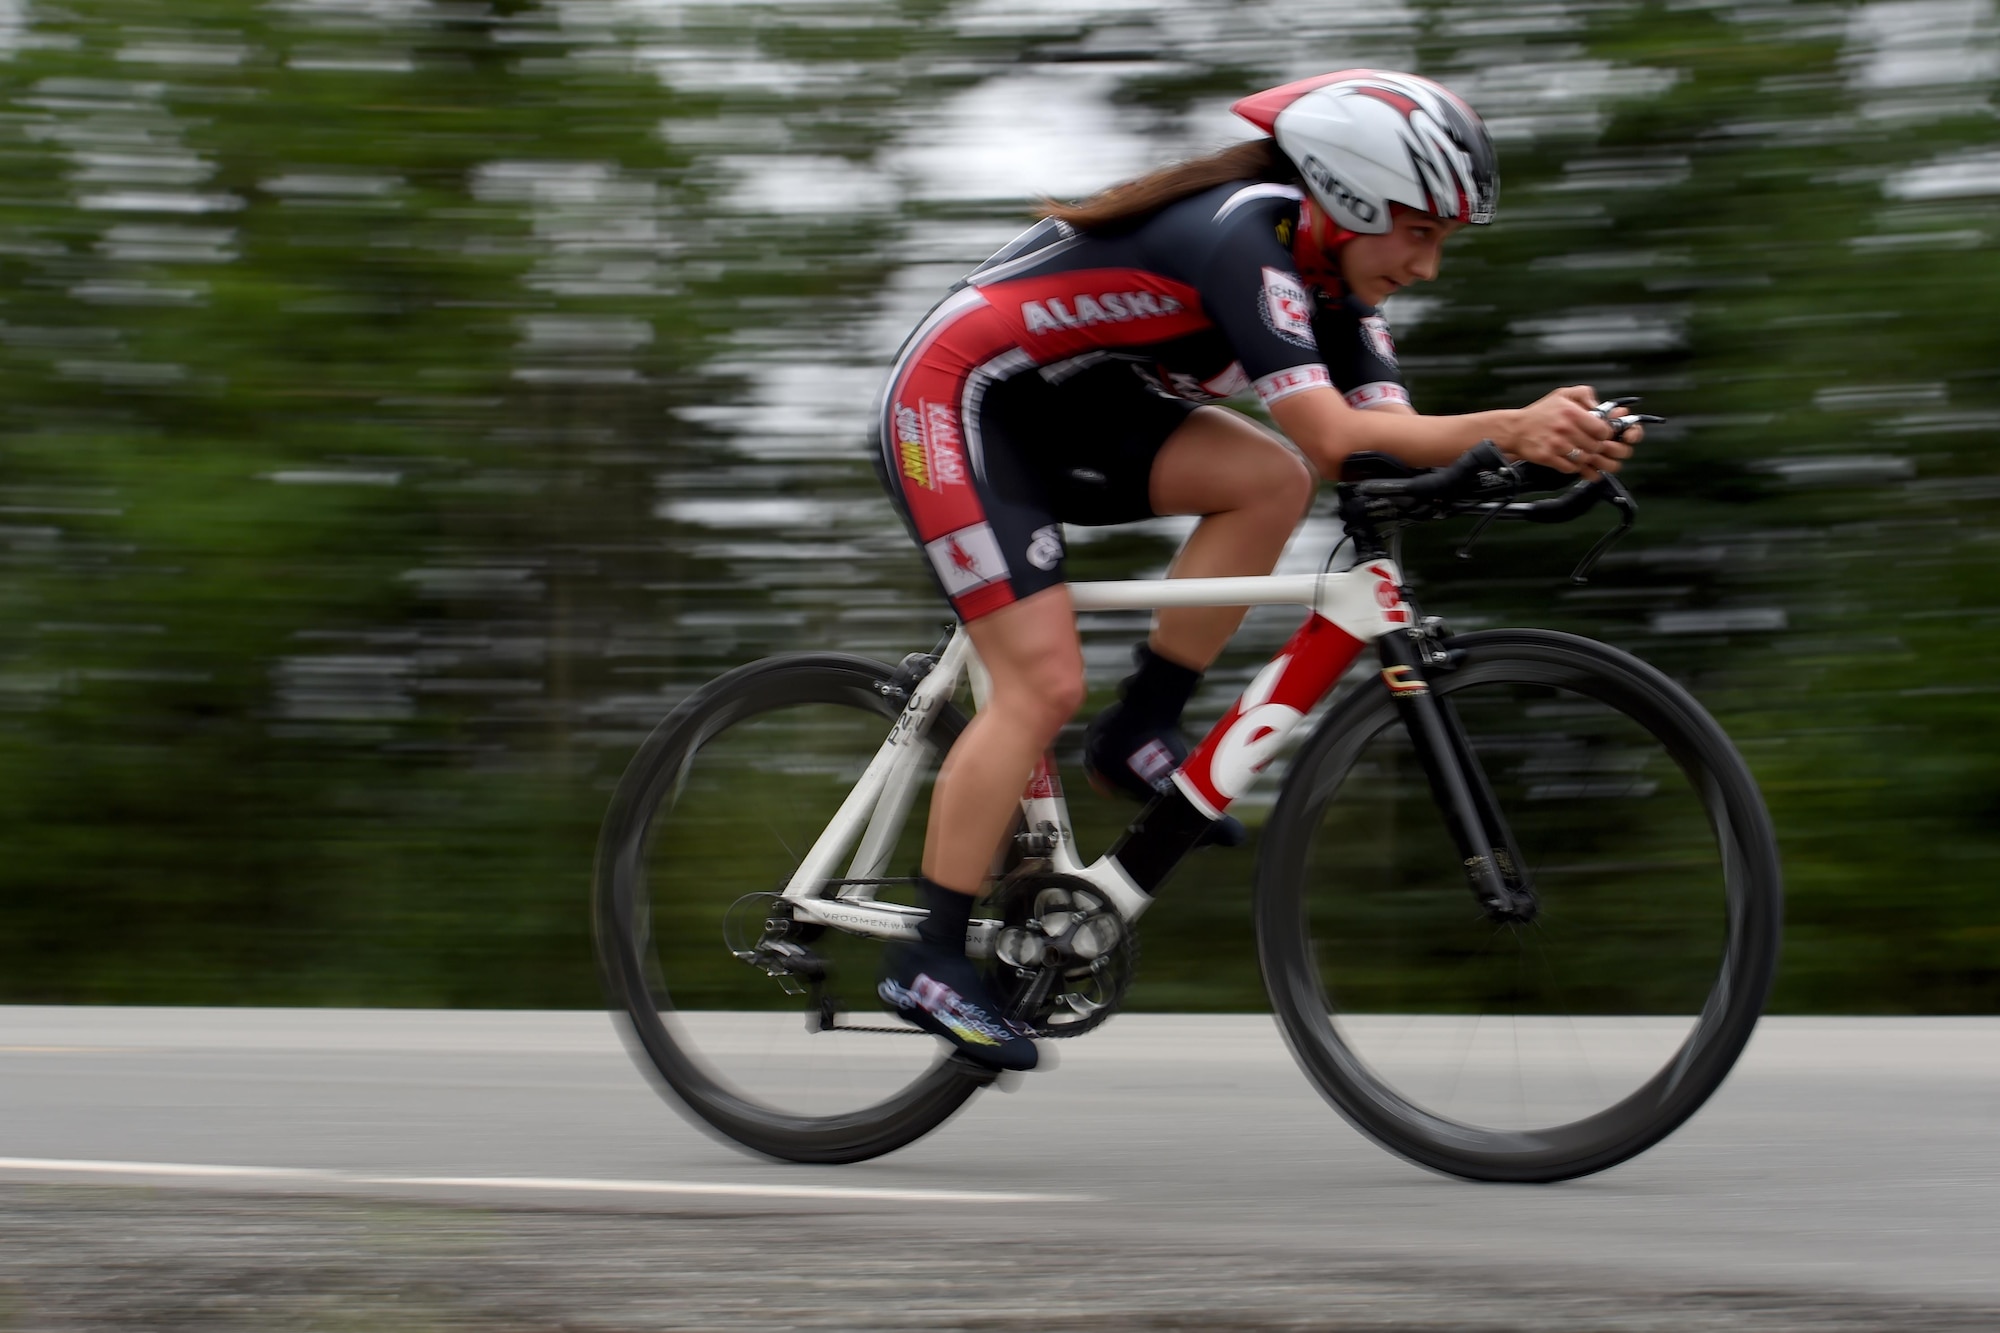 Kinsey Loan streaks down the race path during the Moose Run time-trial race at Joint Base Elmendorf-Richardson, Alaska, Aug. 3, 2017. For more than 15 years, the club has hosted road race events at JBER.